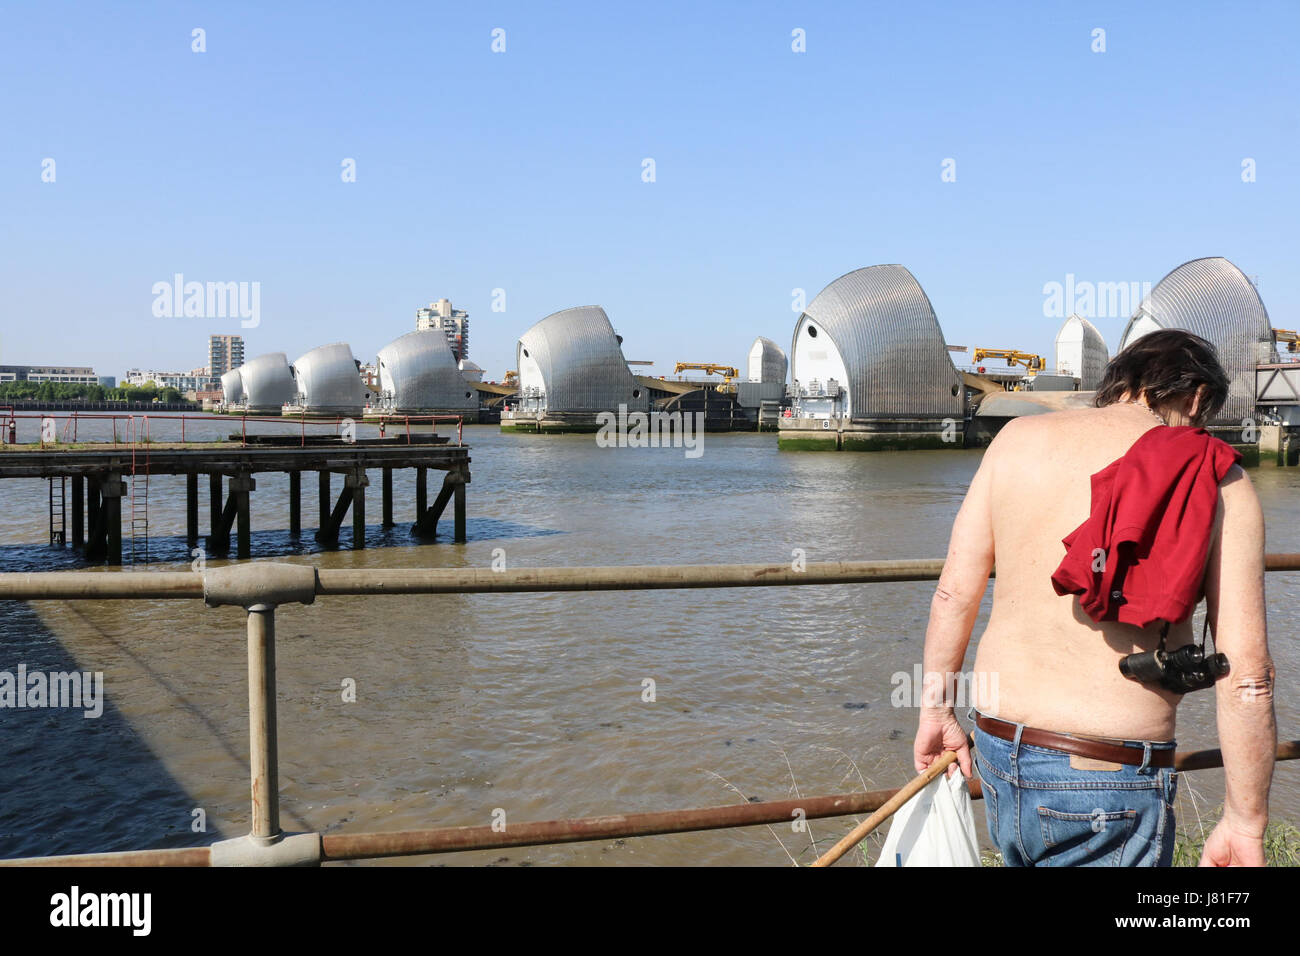 London UK. 26th May 2017. The Thames Barrier against clear skies on the hottest day of the year Credit: amer ghazzal/Alamy Live News Stock Photo